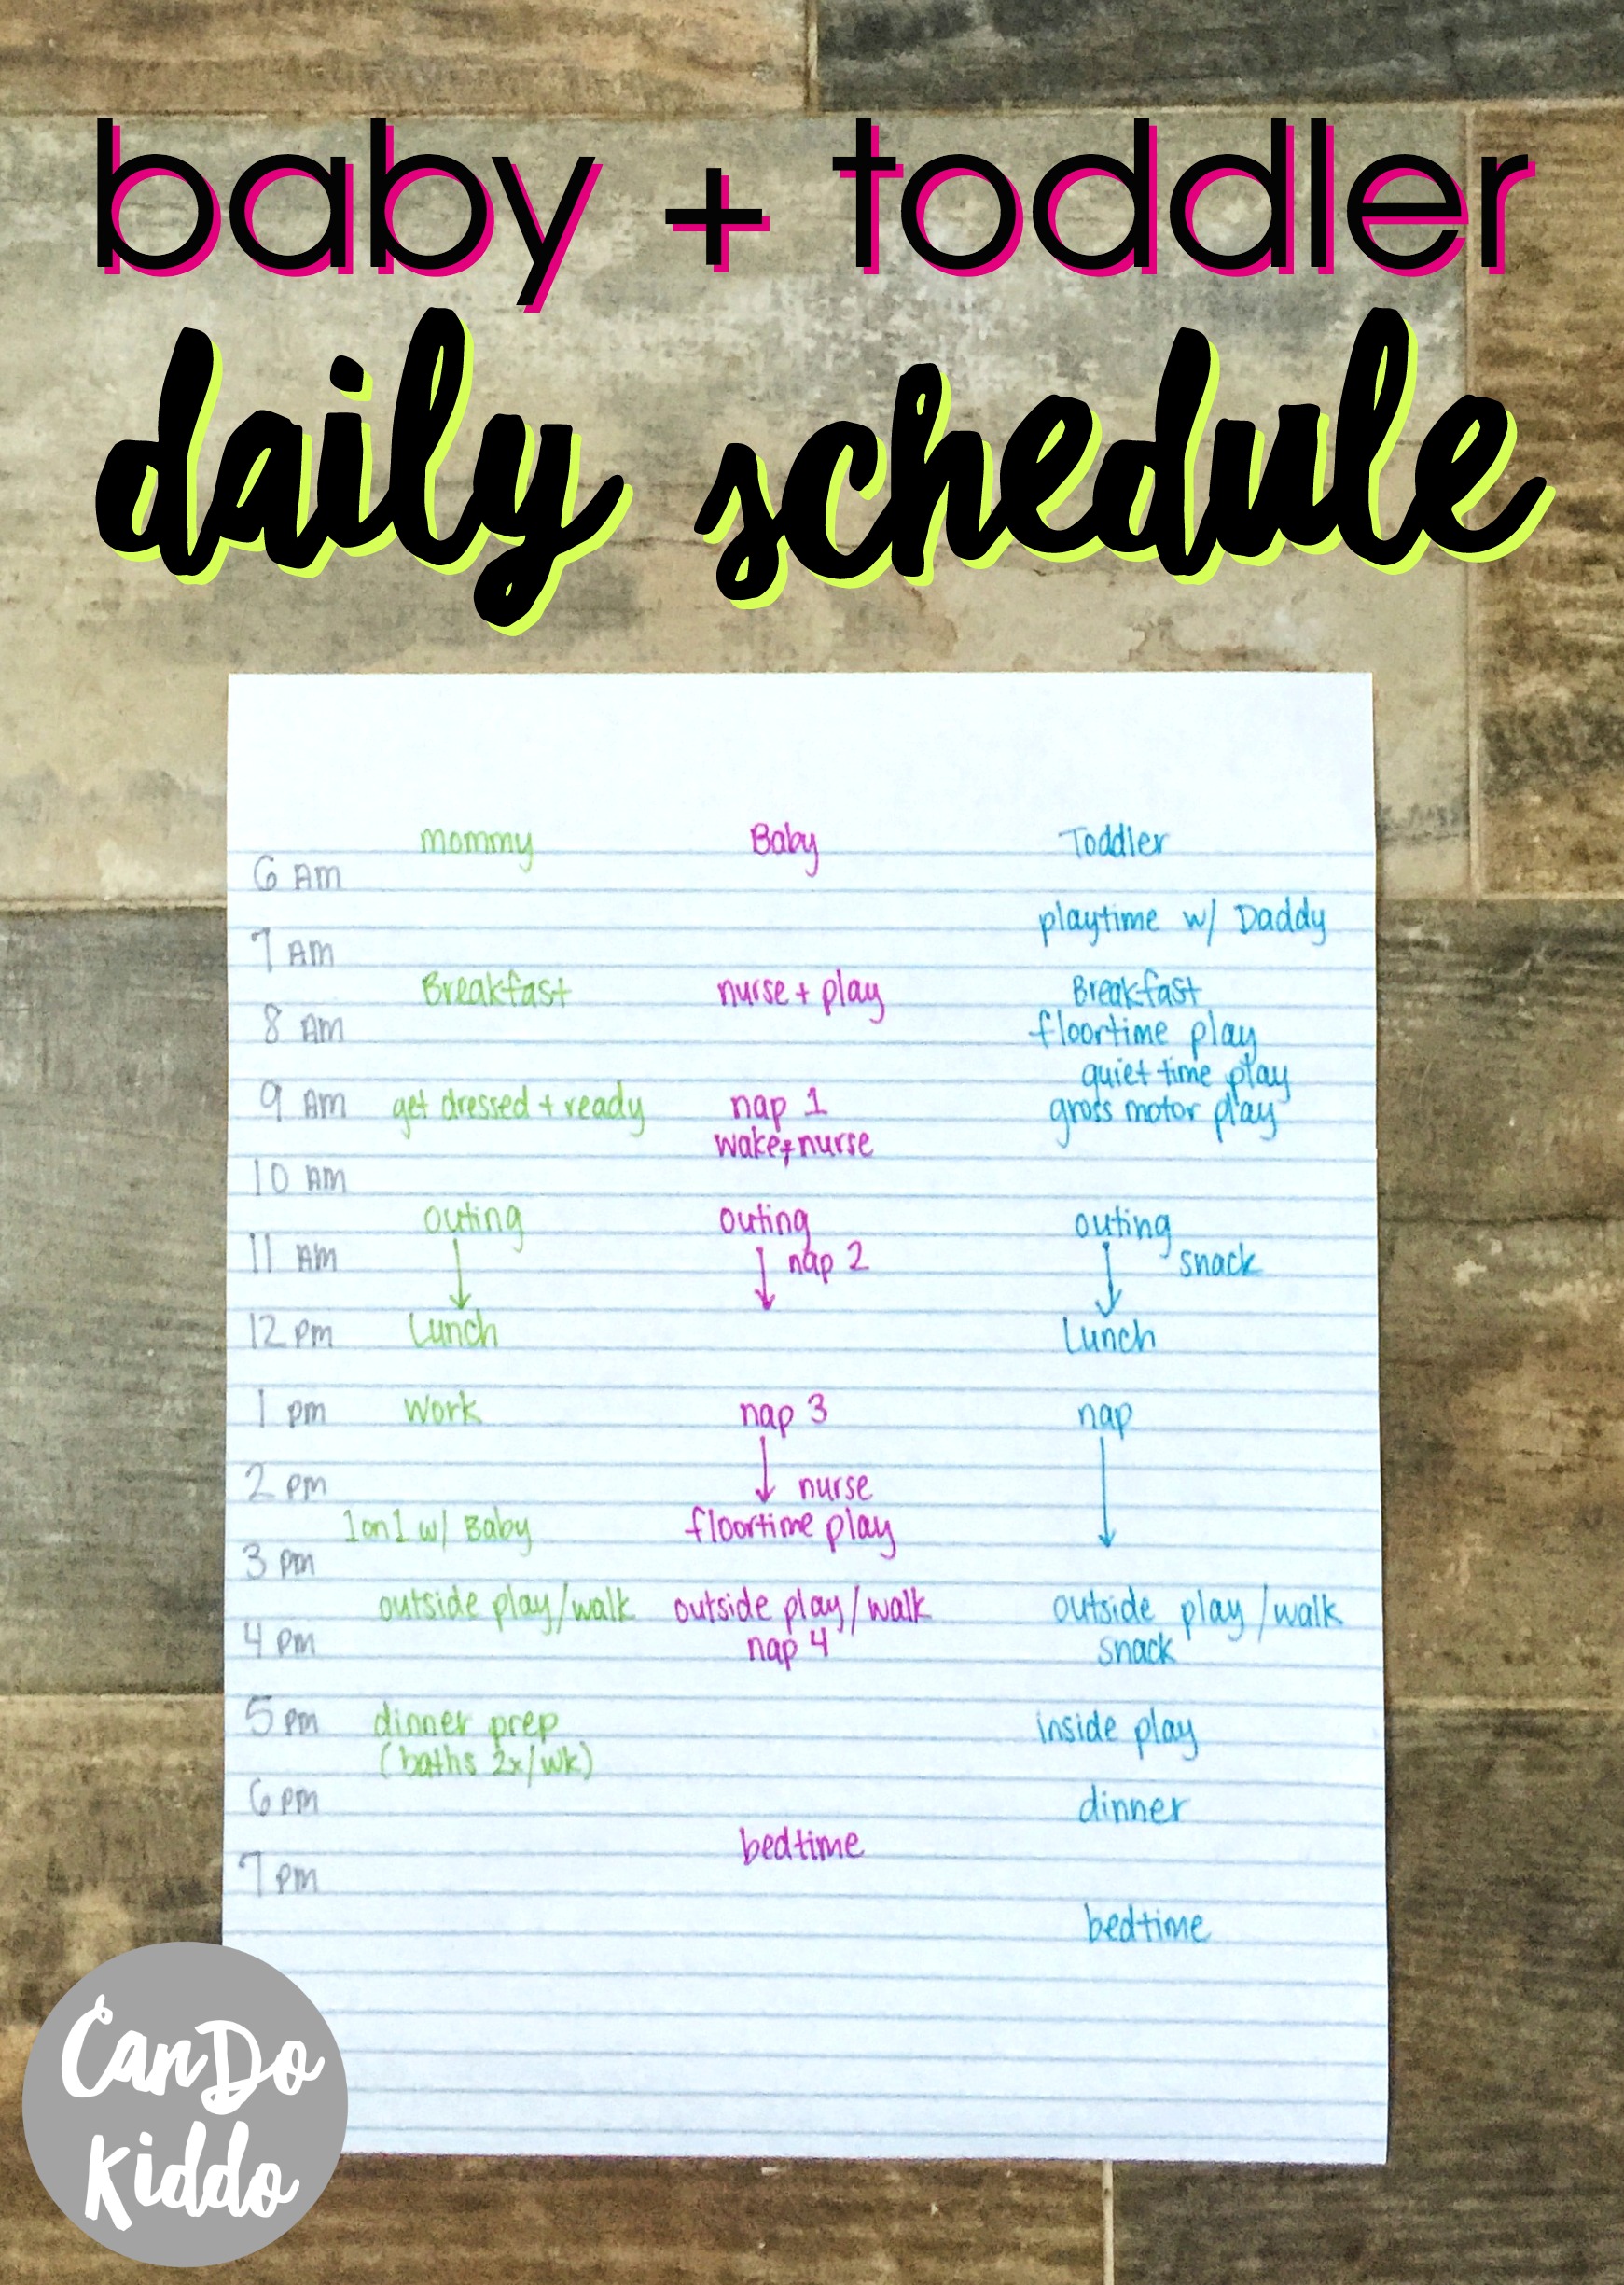 my-stay-at-home-infant-and-toddler-schedule-cando-kiddo